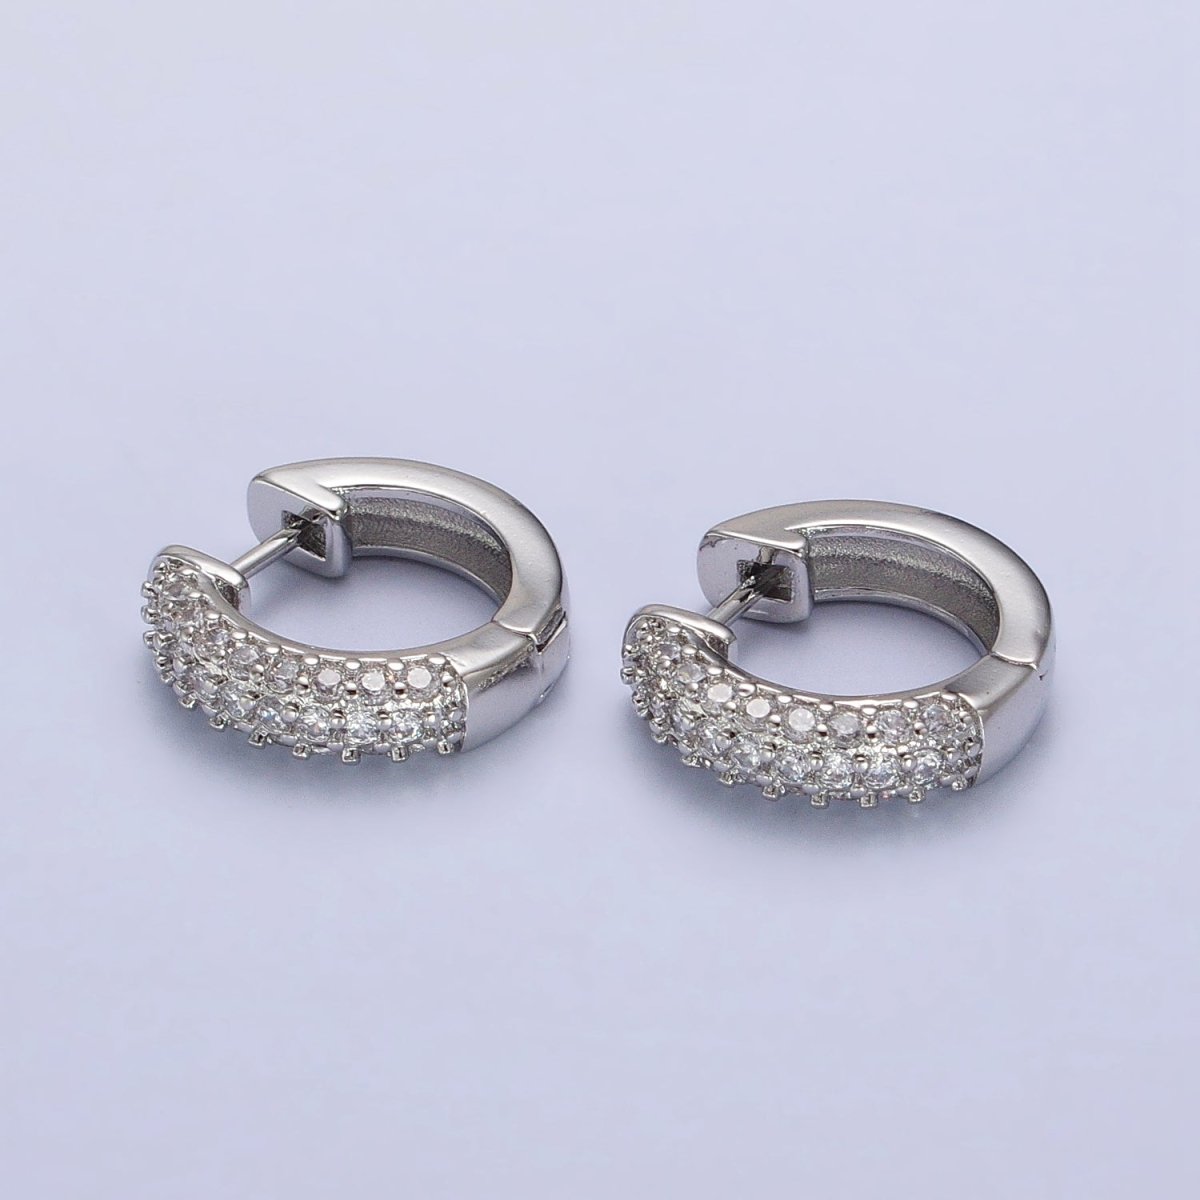 17mm Clear Micro Paved CZ Huggie Earrings in Gold & Silver | AB137 AB138 - DLUXCA